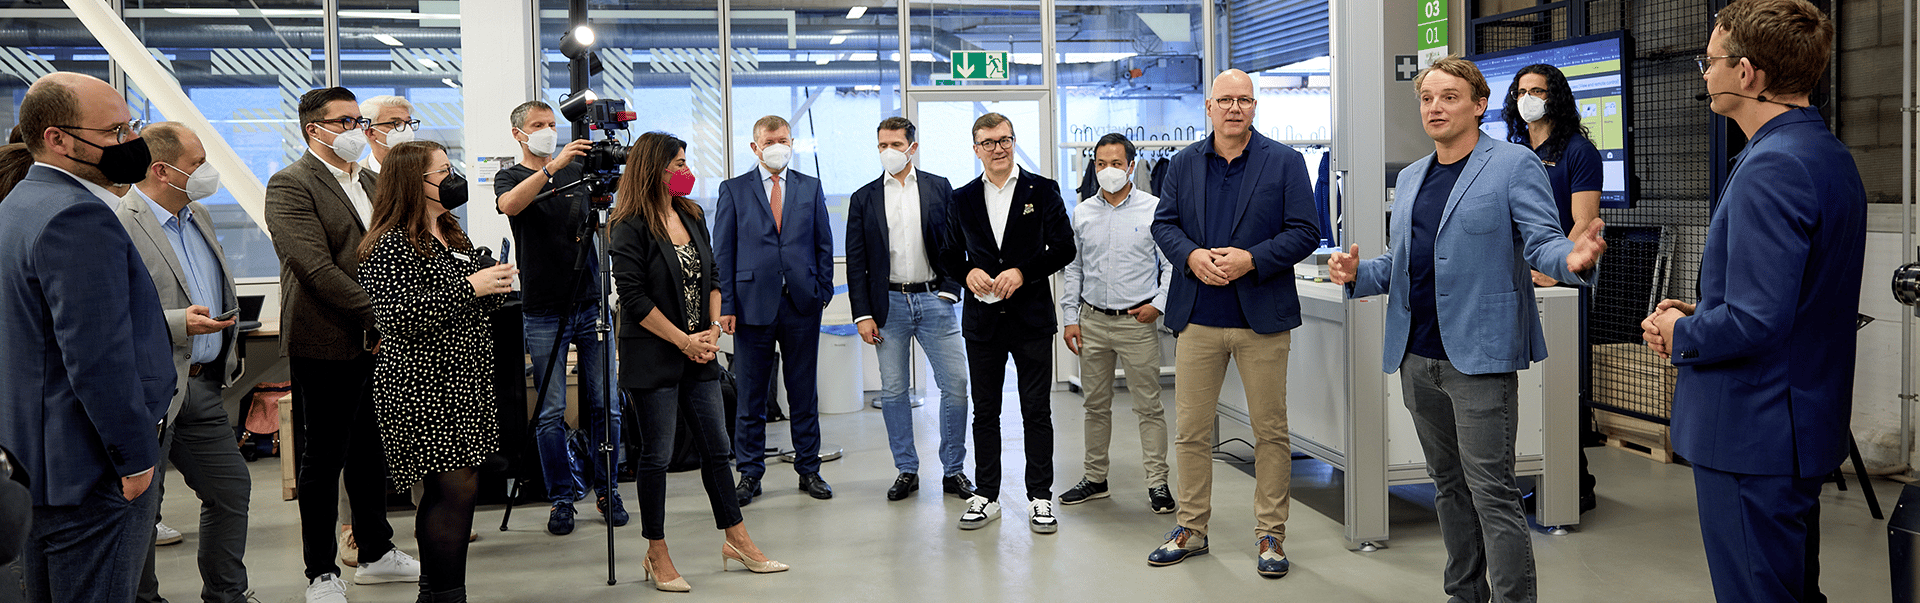 Industry 4.0 Pop-Up Factory in Walldorf